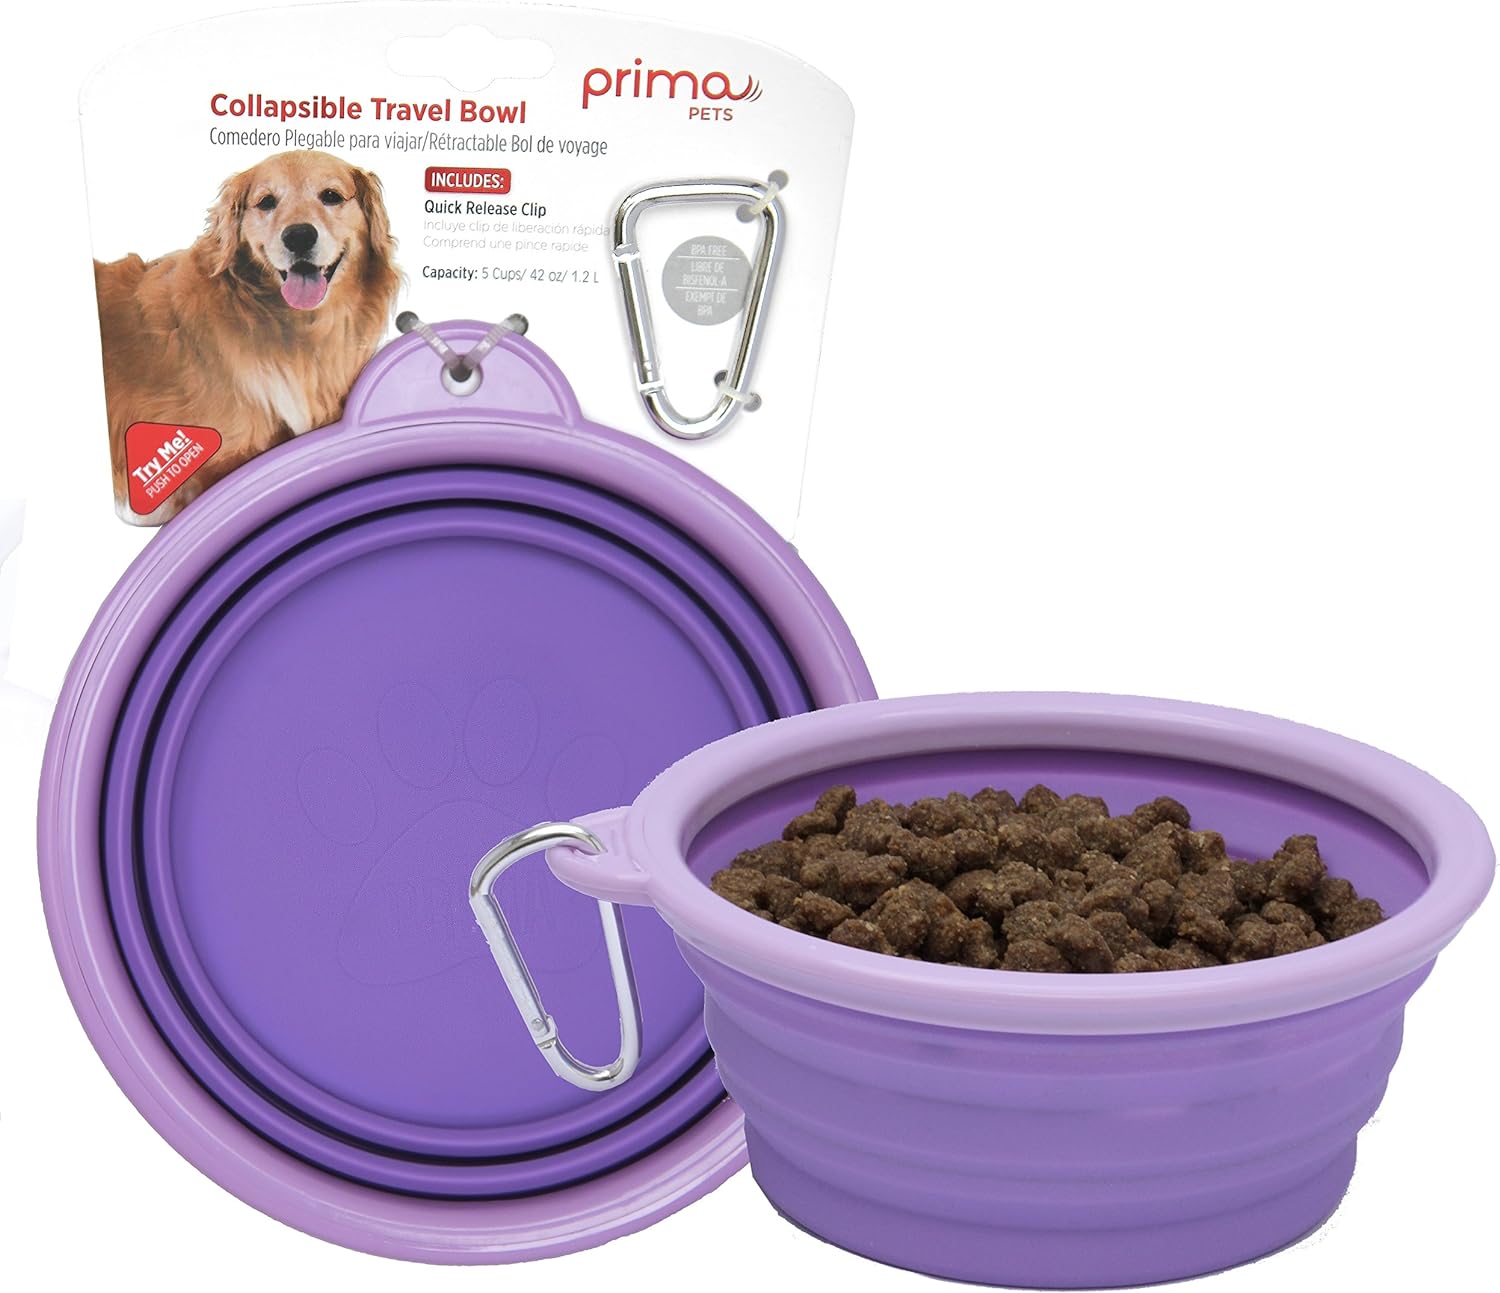 Prima Pets Collapsible Silicone Travel Bowl